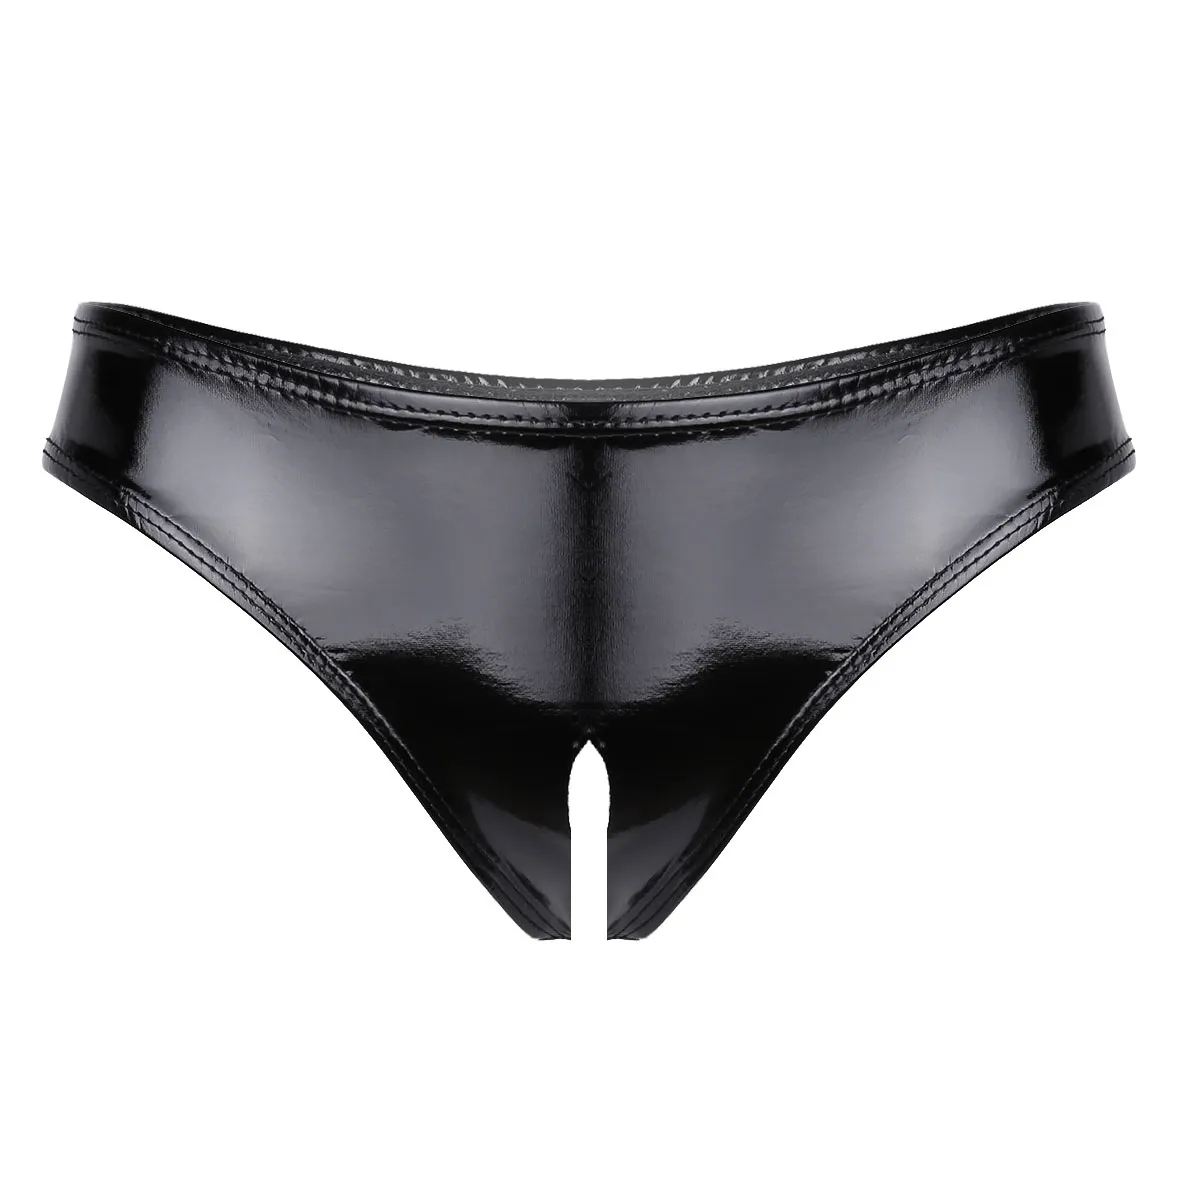 Sexy Black Patent Leather Latex Briefs With Open Crotch And Open Pussy  Womens Adult Lingerie Underwear Por207m Z230710 From Heijue02, $5.86